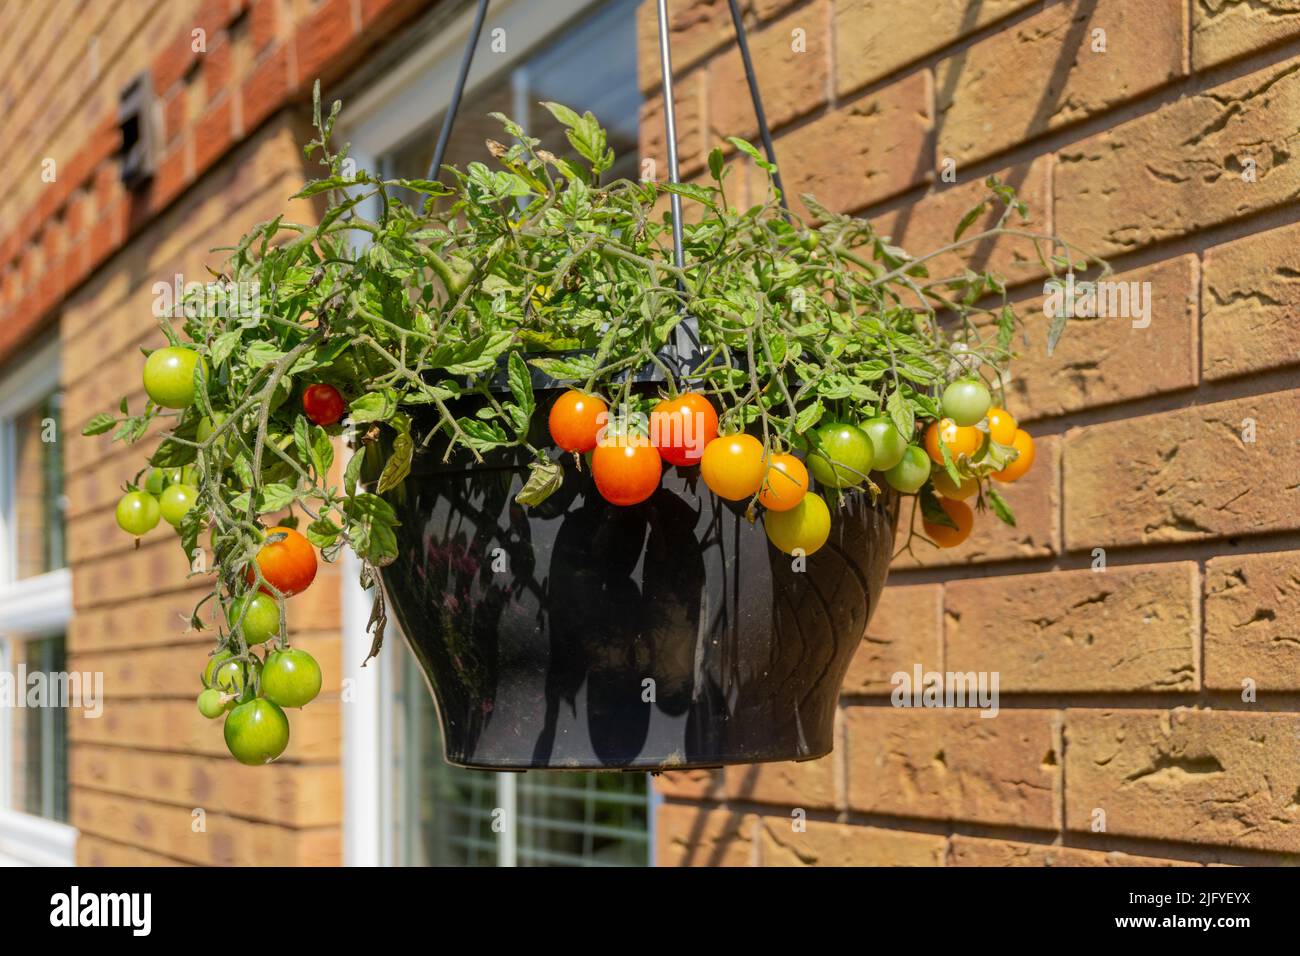 Bush tomato, variety Tumbling Tom red, Lycopersicon escuentum, growing in a hanging basket against a house wall, UK Stock Photo